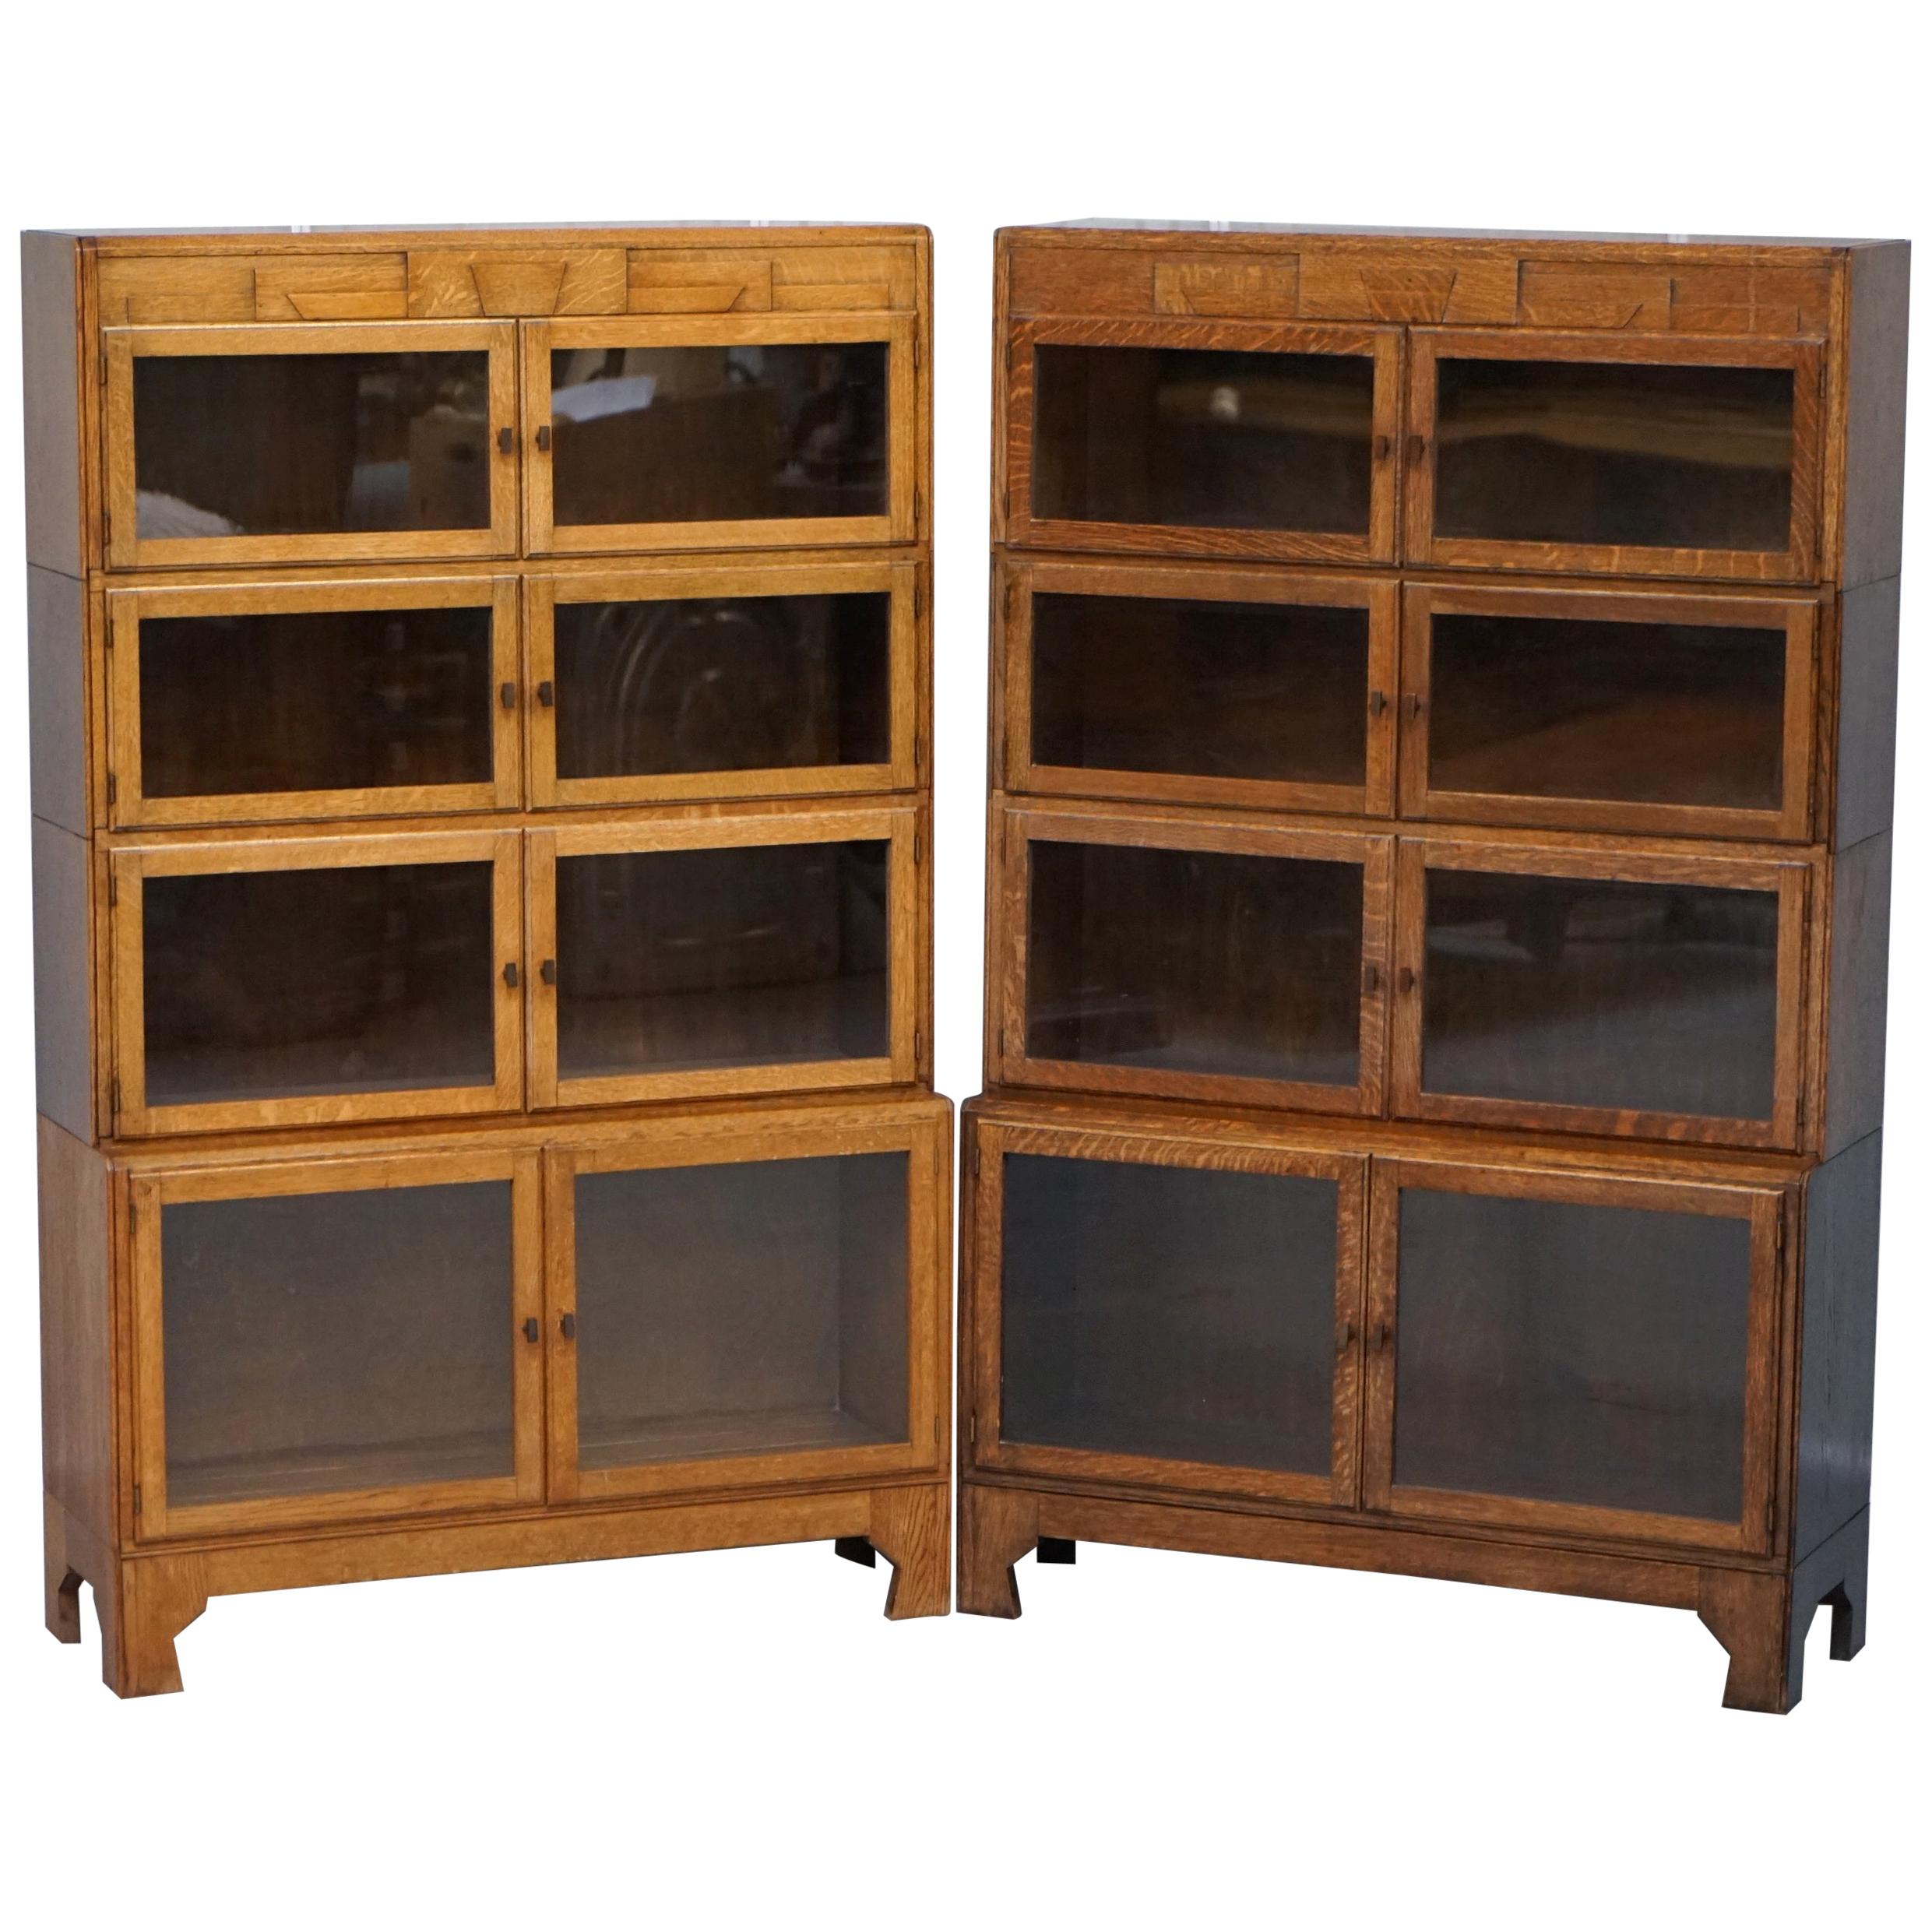 Rare Pair of Art Deco Oak Modular Minty Oxford Antique Stacking Legal Bookcases